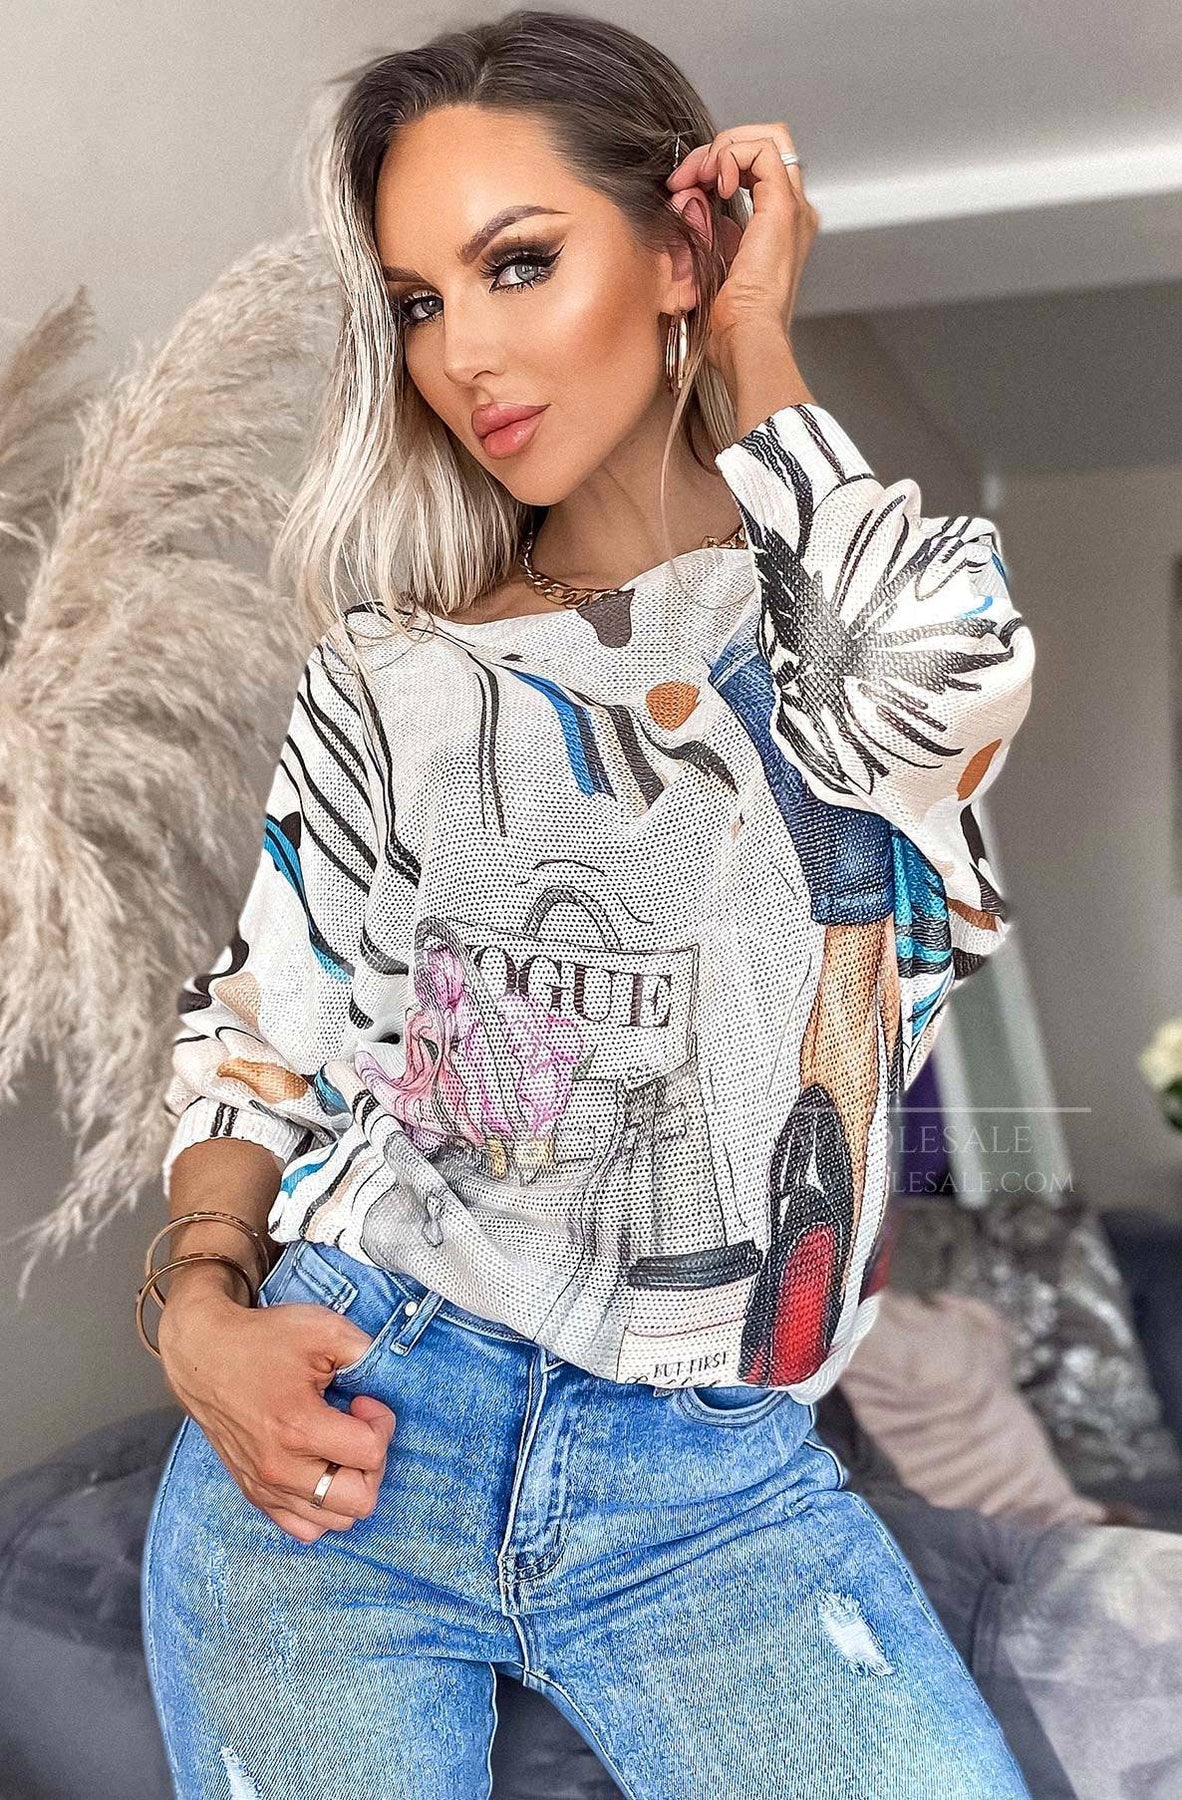 SHANICE 'VOGUE' PRINTED BATWING TOP